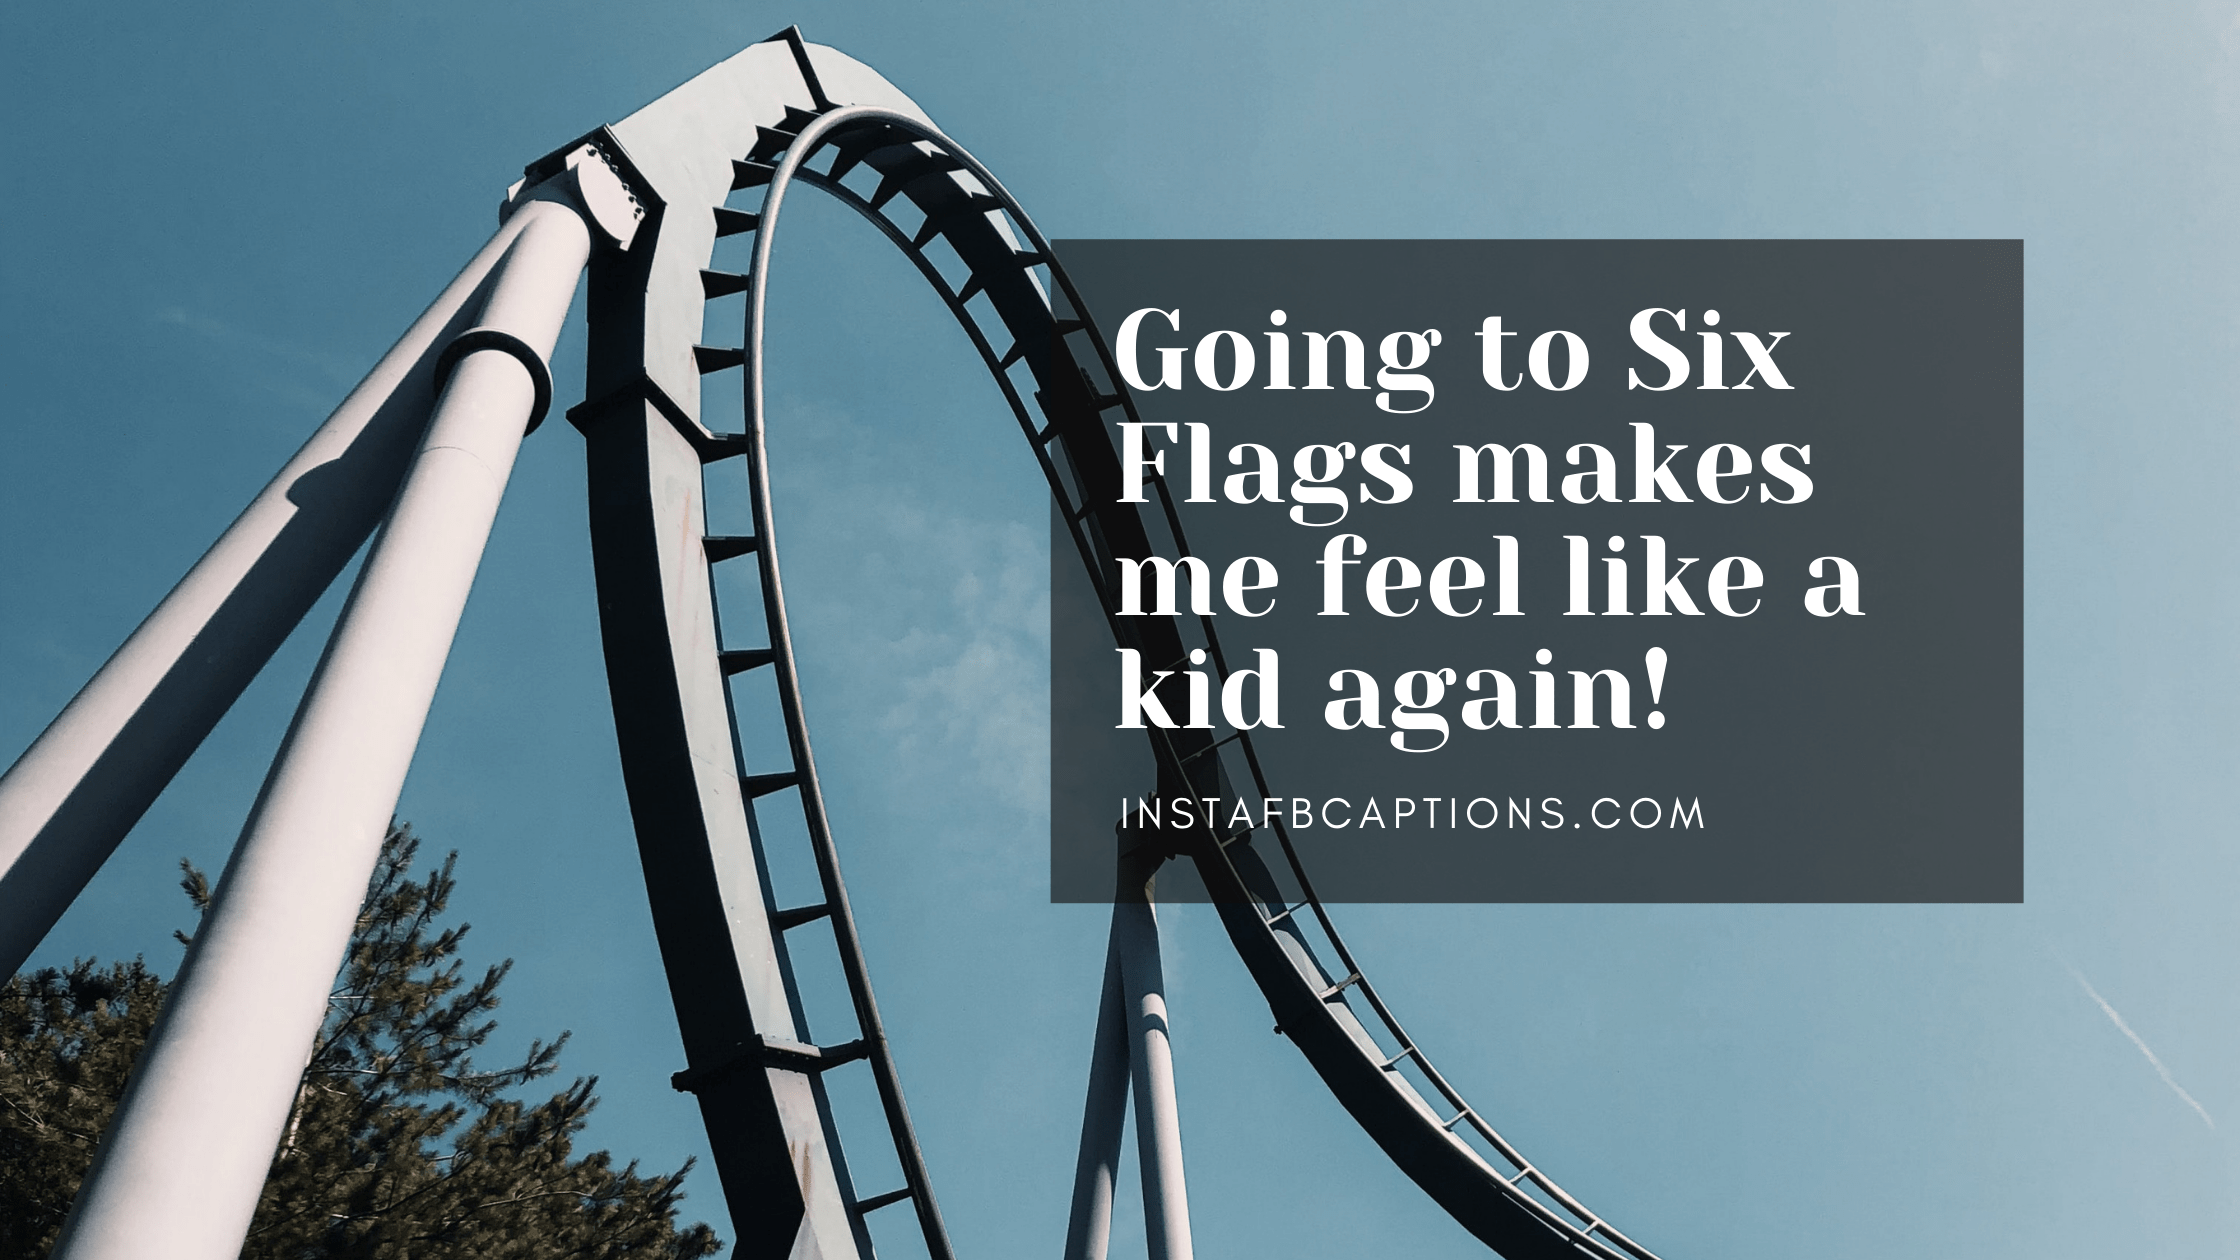 Best Six Flags Captions  - Best Six Flags Captions  - 96 Six Flags Instagram Captions in 2022